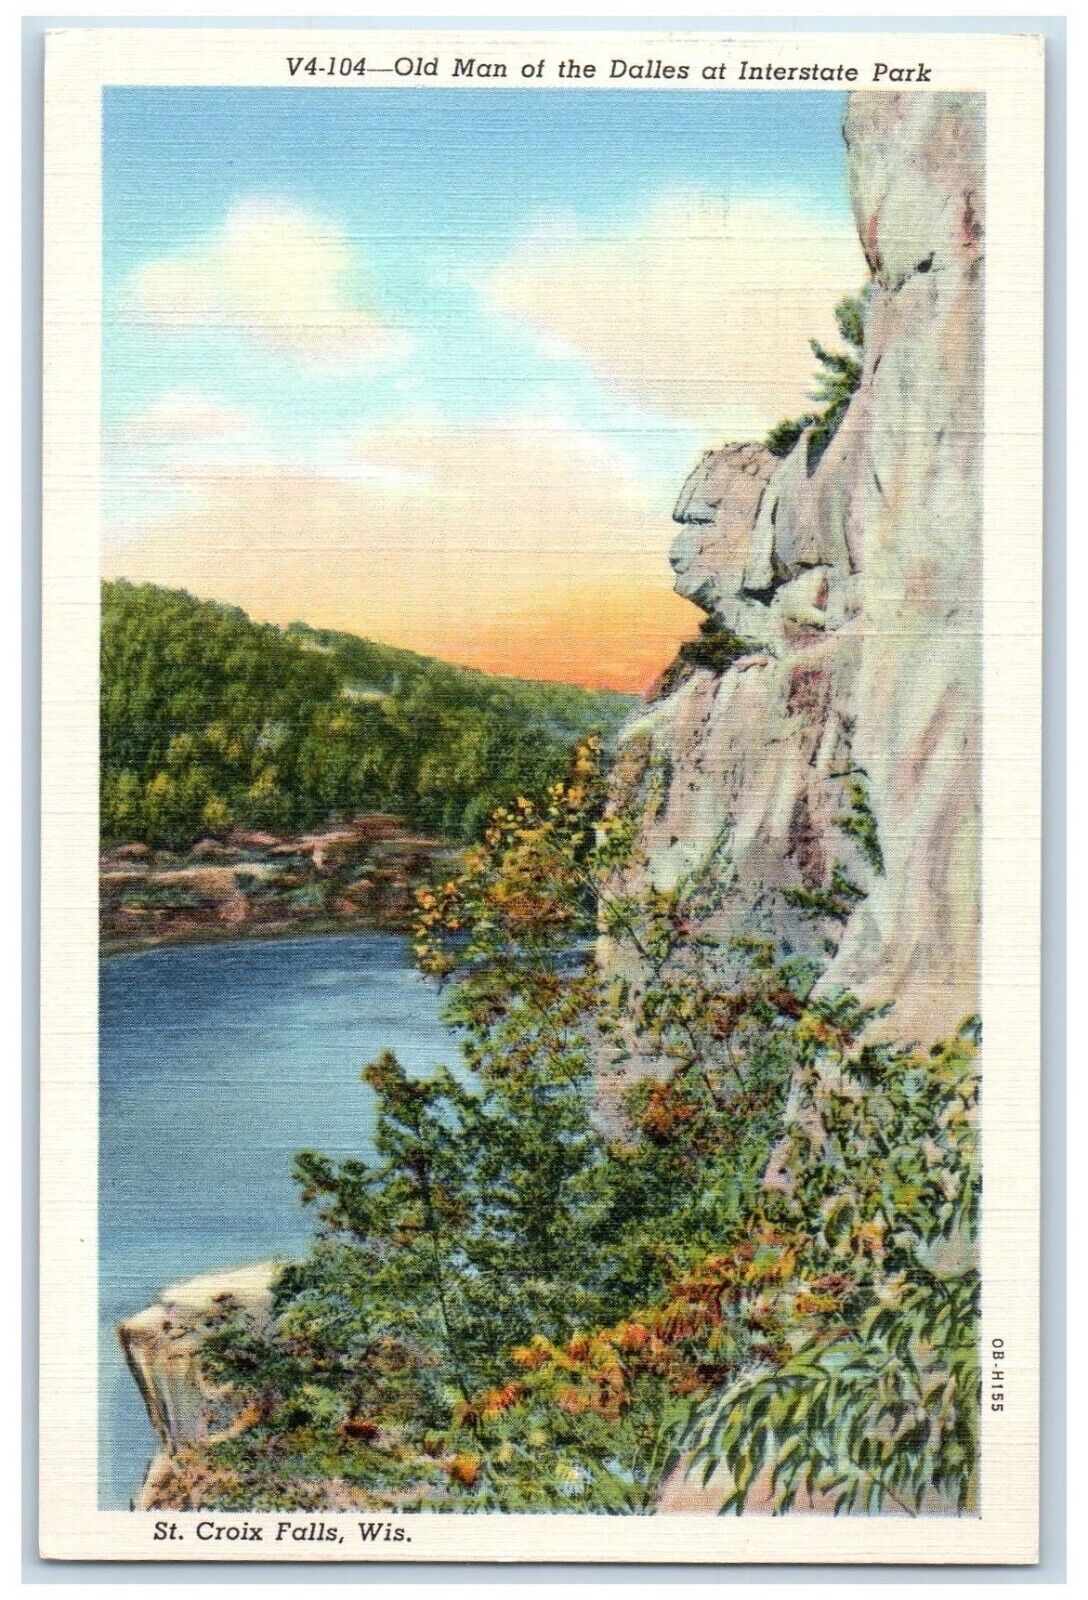 1940 Old Man Dalles Interstate Park St Criox Falls Wisconsin WI Antique Postcard